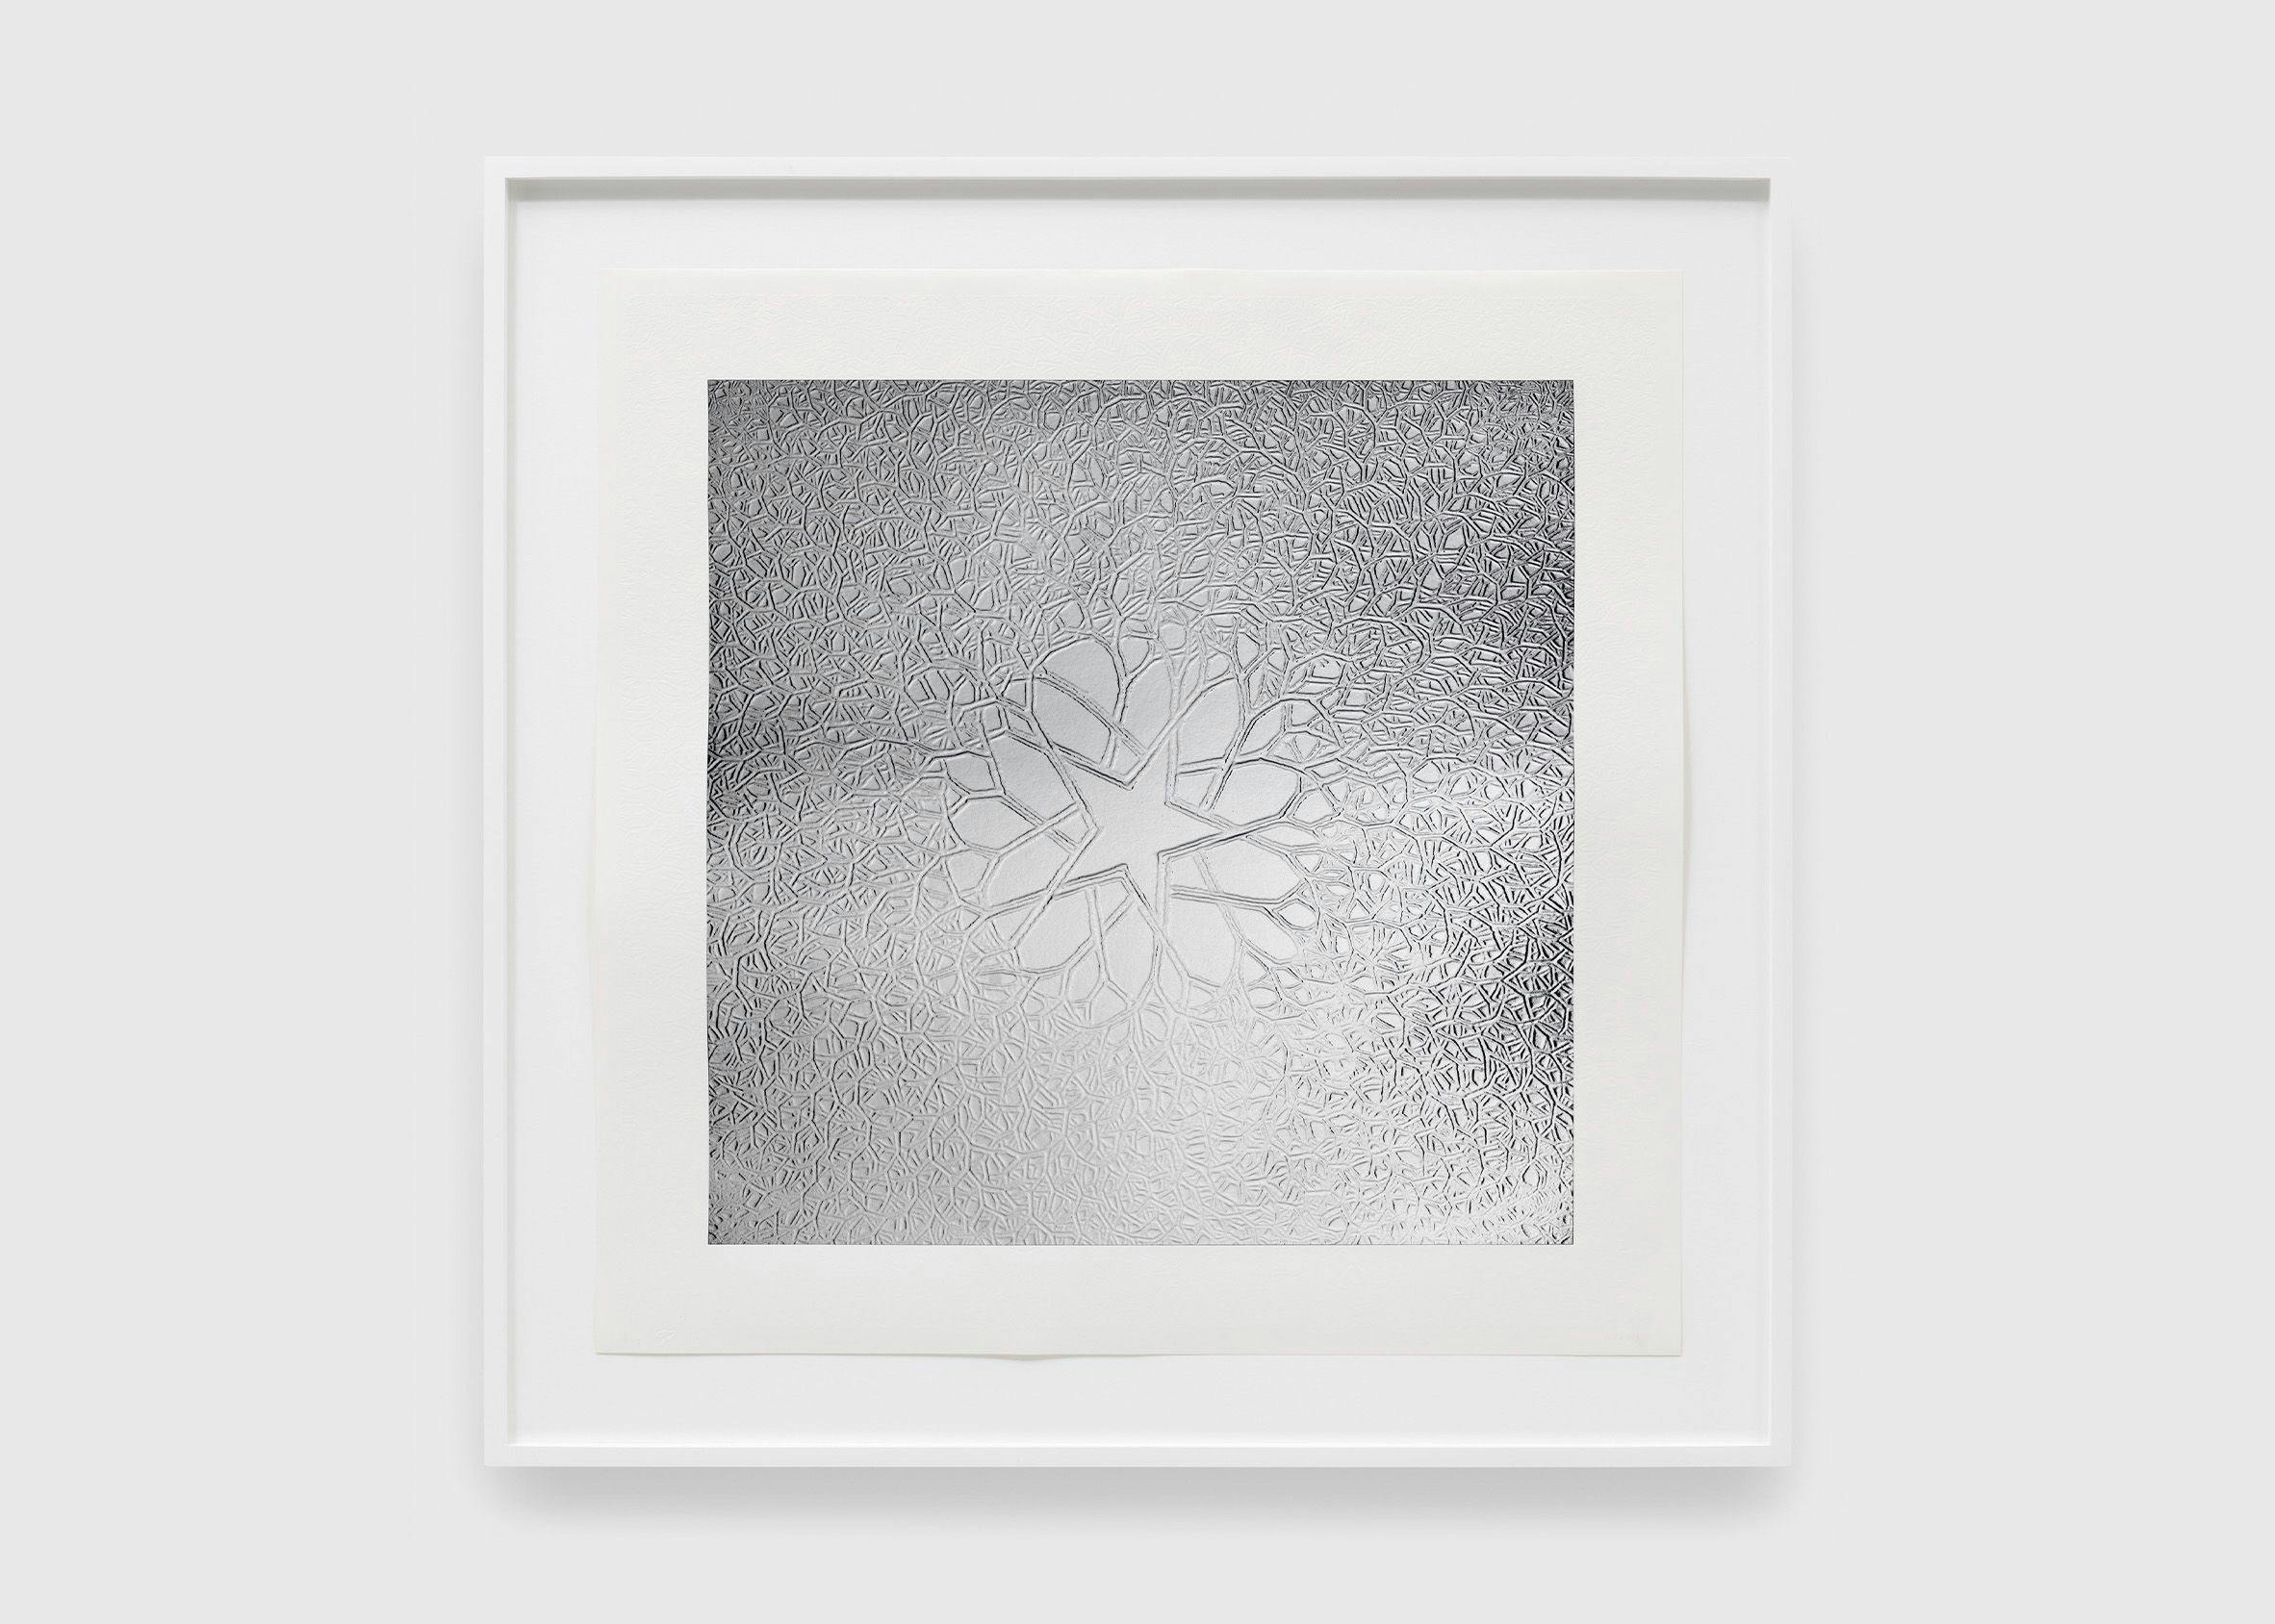  A print by Ruth Asawa, titled Untitled (P.002-I Tied-Wire Sculpture Drawing with Five-Pointed Center Star, Embossed [Silver]), dated 1973.